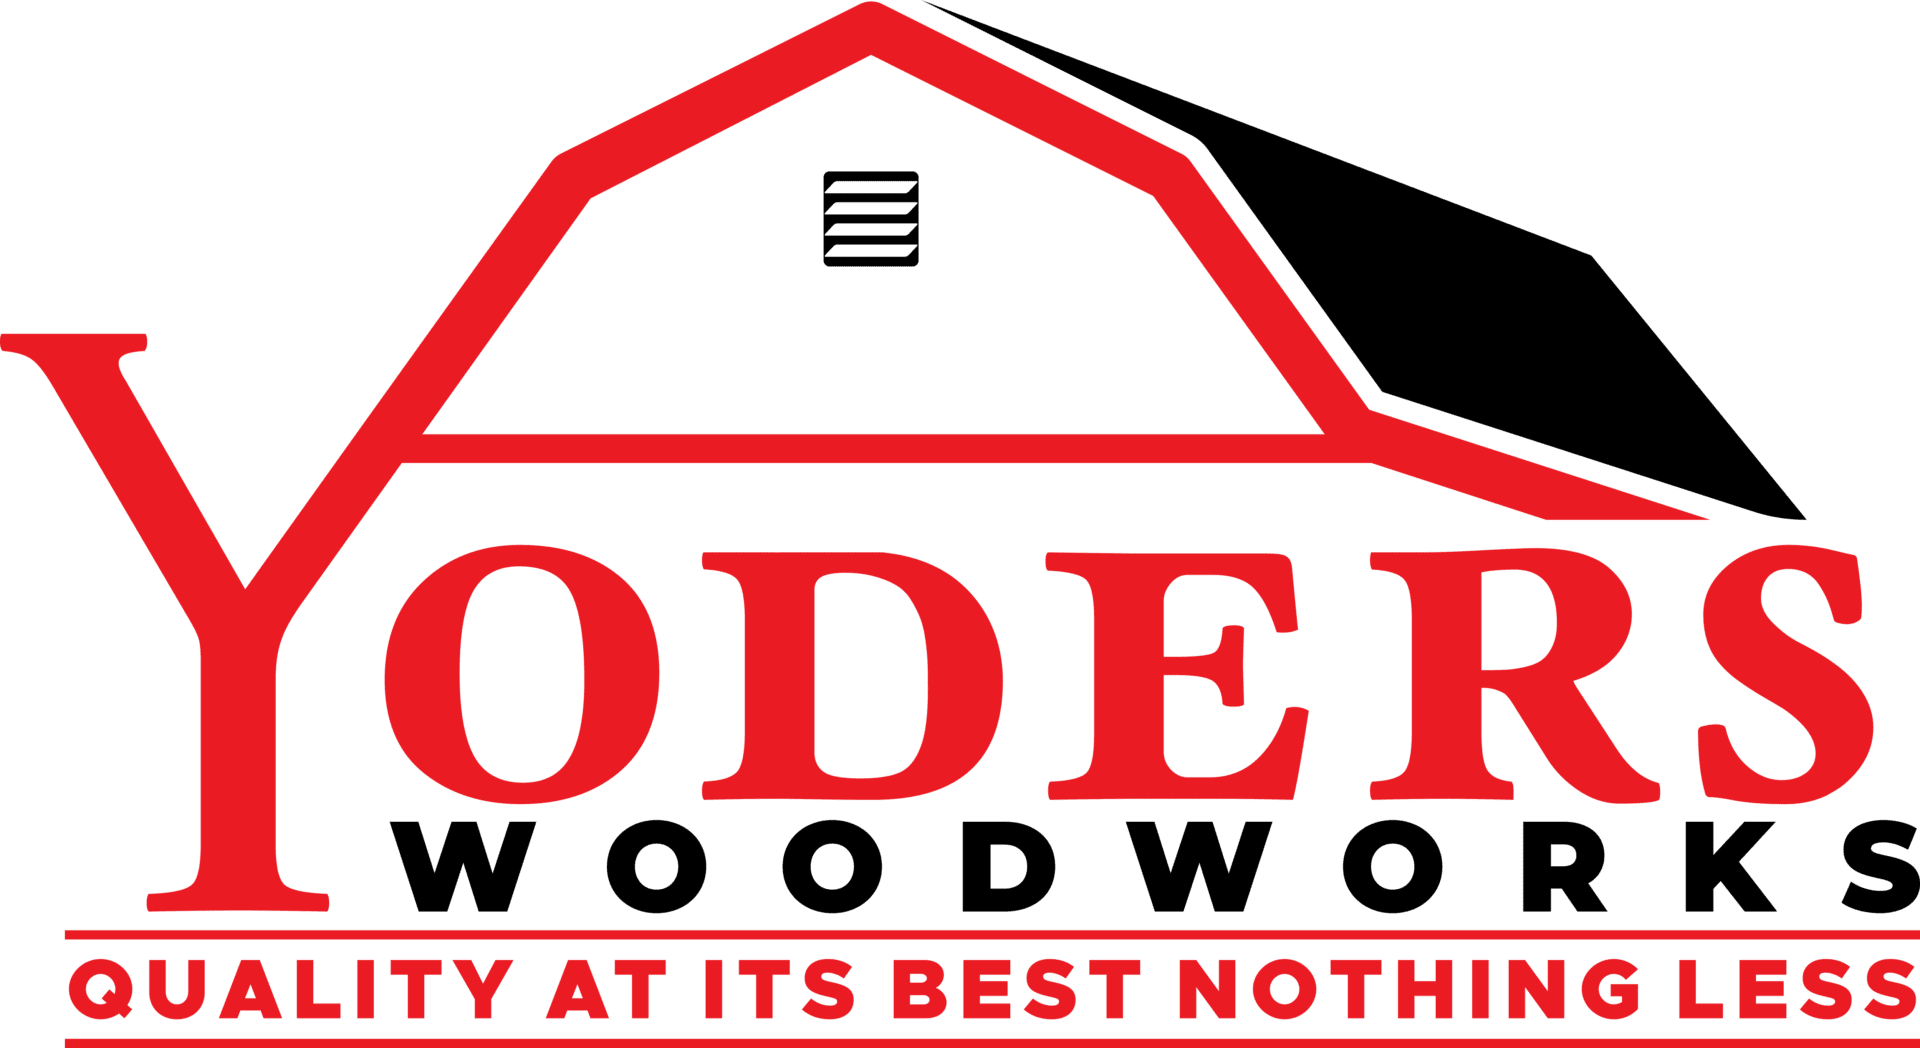 Yoders Woodworks main logo